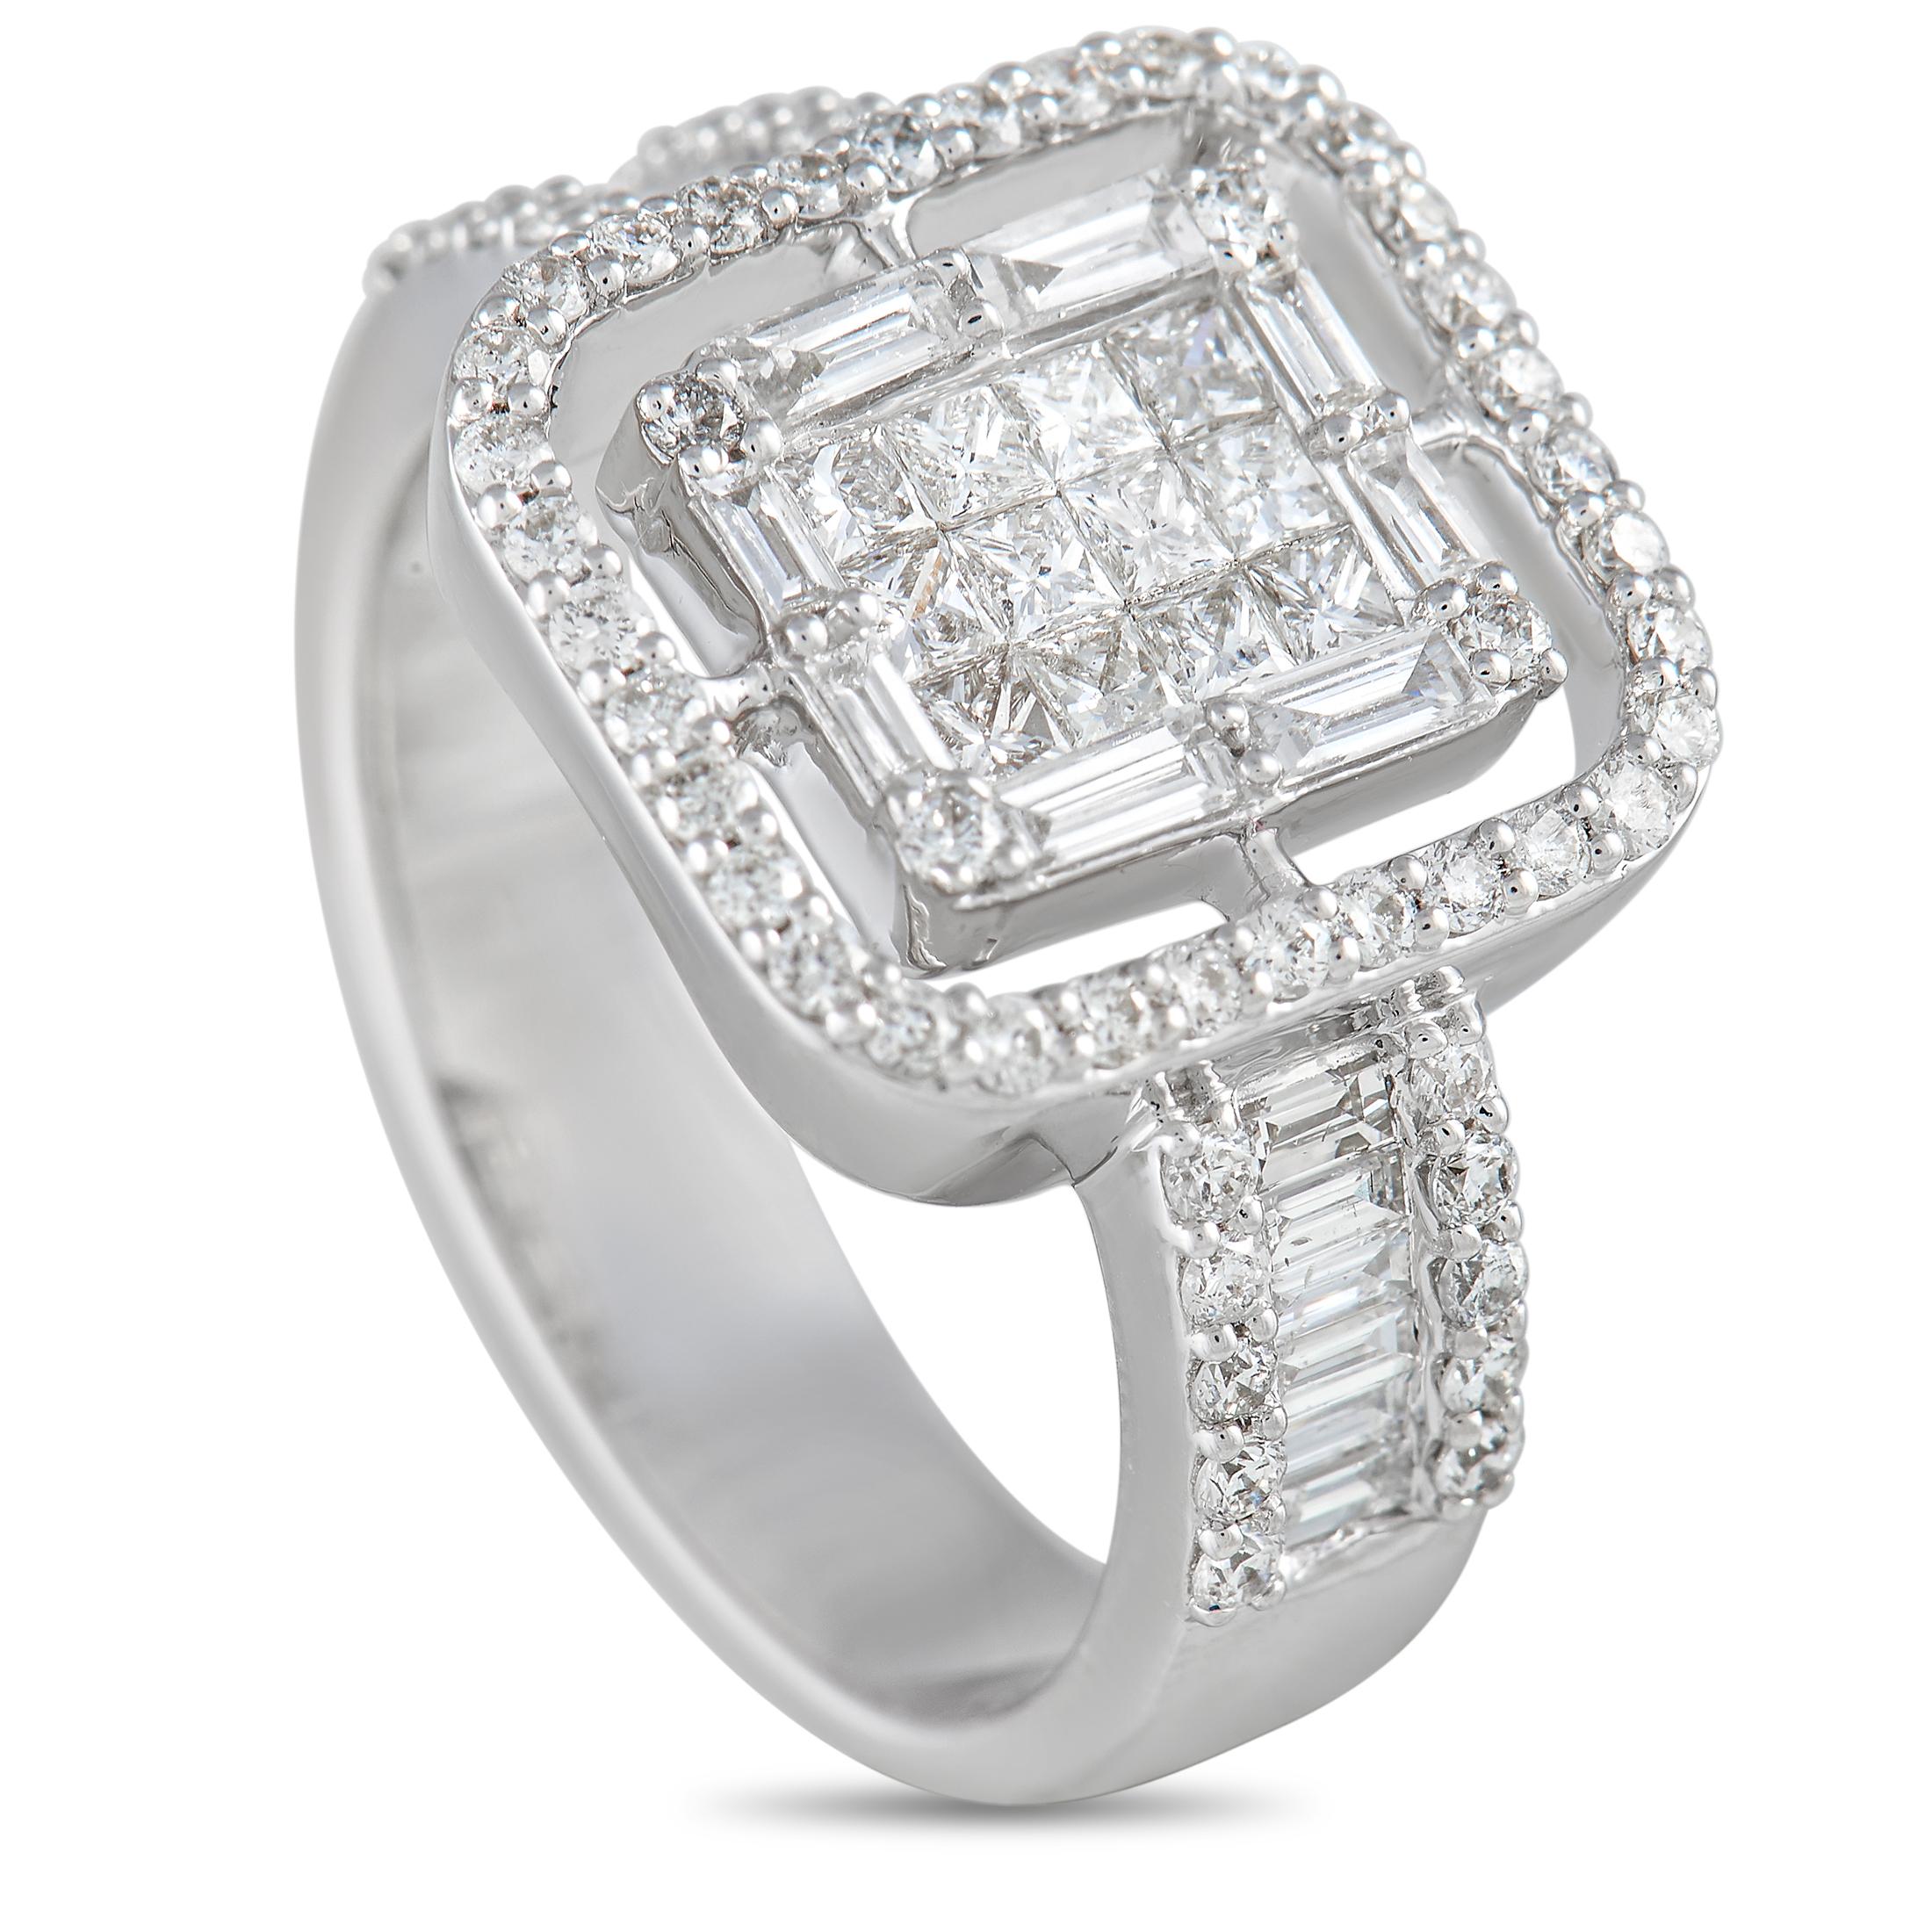 This exceptional 14K White Gold ring will continually command attention. The sophisticated setting comes to life thanks to inset diamonds that together possess a total weight of 1.28 carats. It features a 4mm wide band and a 3mm top height, meaning